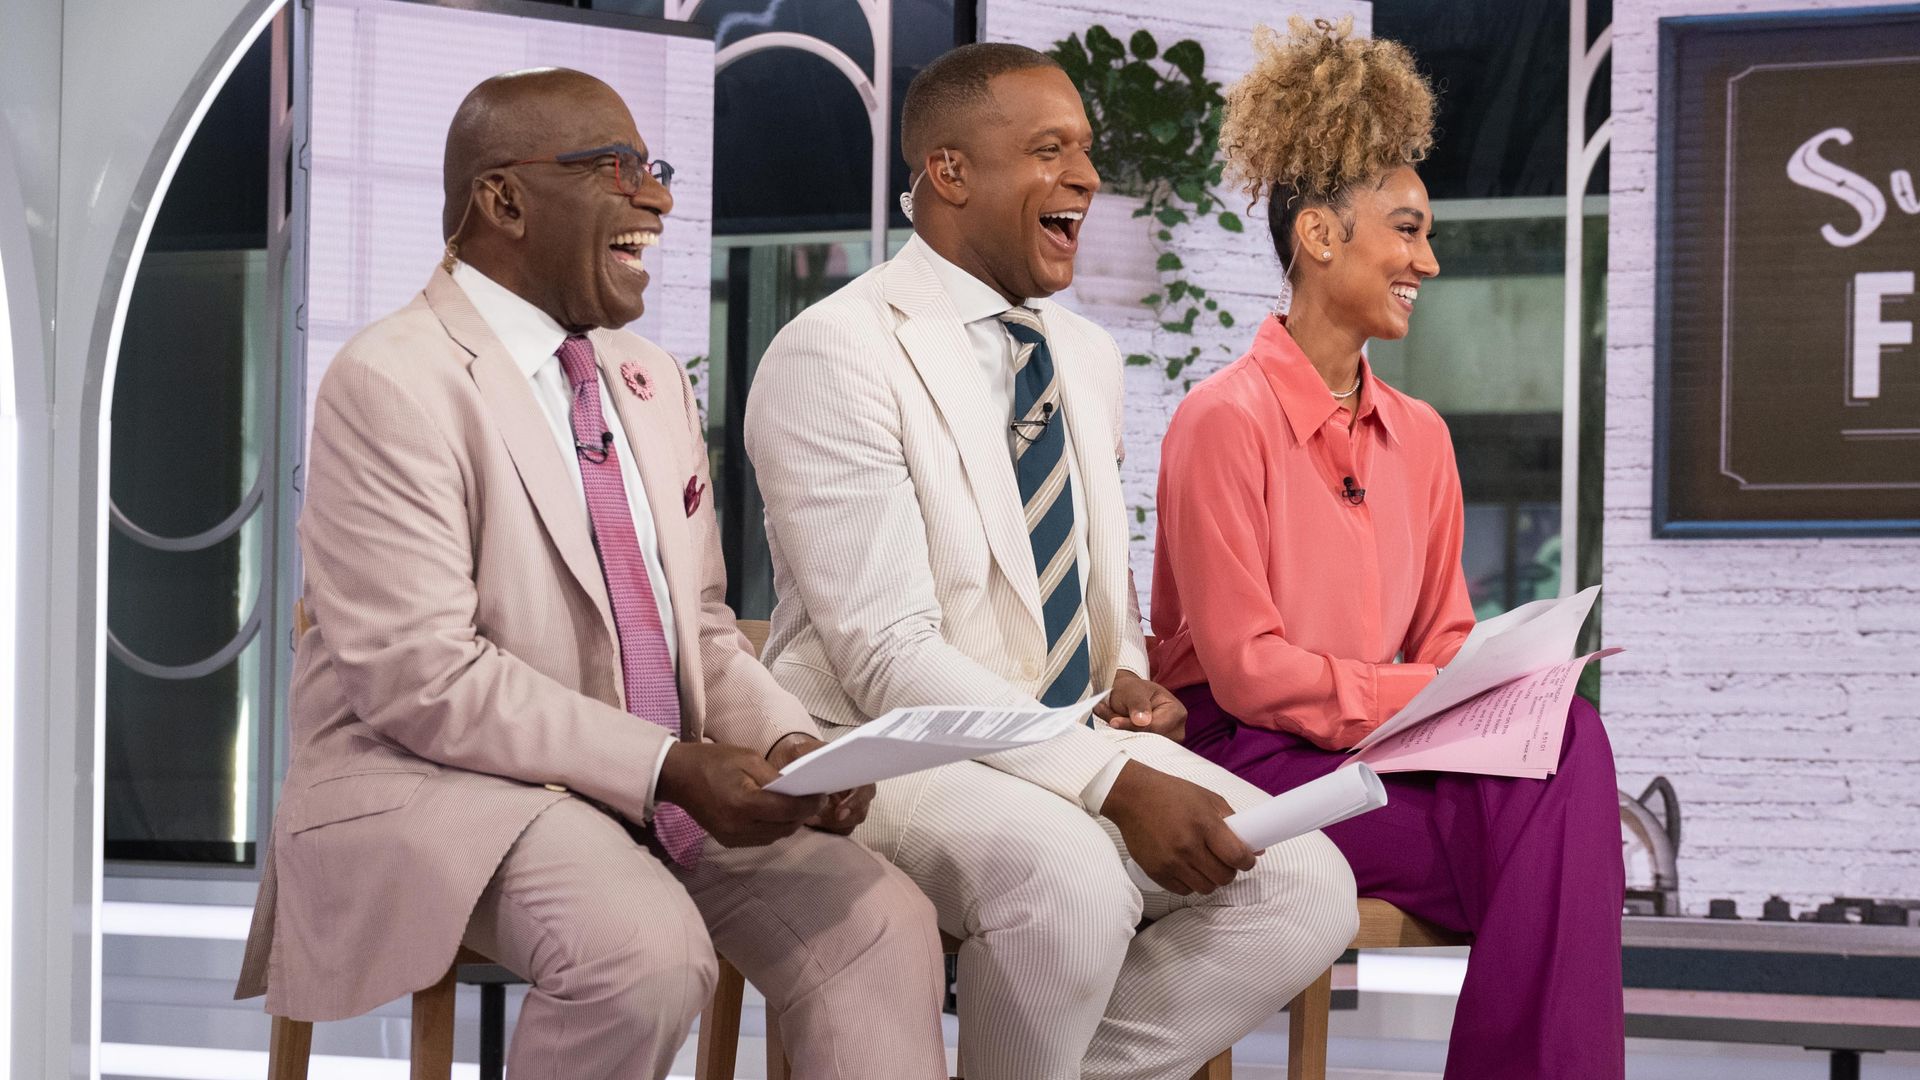 Ally Love hosting Today with Craig Melvin and Al Roker